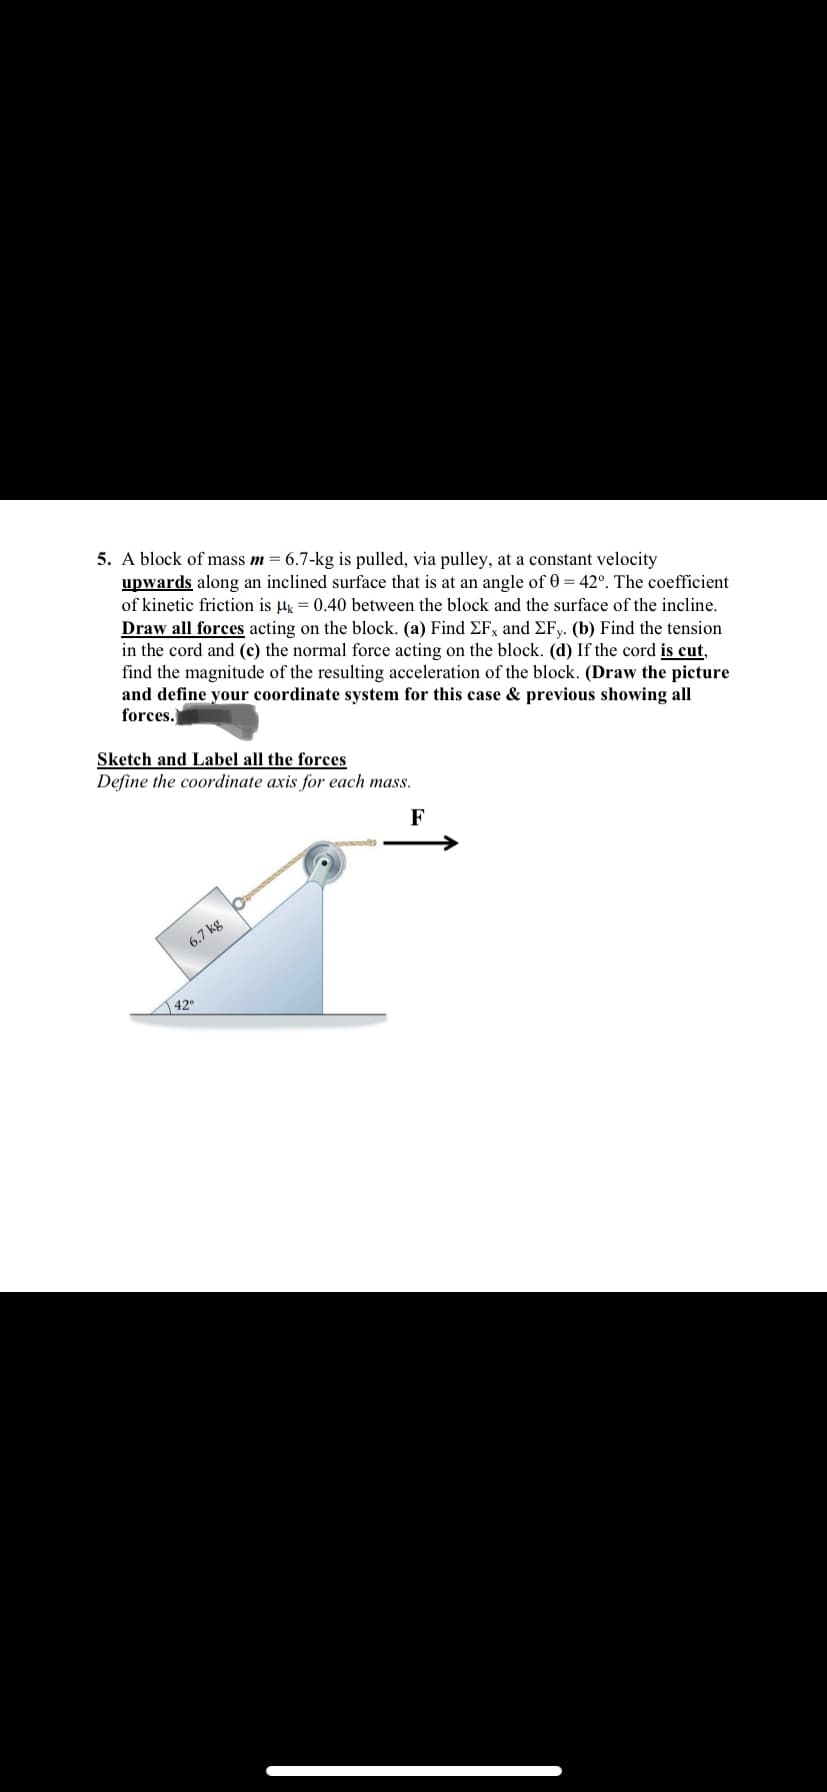 5. A block of mass m = 6.7-kg is pulled, via pulley, at a constant velocity
upwards along an inclined surface that is at an angle of 0 = 42°. The coefficient
of kinetic friction is µg = 0.40 between the block and the surface of the incline.
Draw all forces acting on the block. (a) Find EF, and EFy. (b) Find the tension
in the cord and (c) the normal force acting on the block. (d) If the cord is cut,
find the magnitude of the resulting acceleration of the block. (Draw the picture
and define your coordinate system for this case & previous showing all
forces.
Sketch and Label all the forces
Define the coordinate axis for each mass.
F
6.7 kg
42
